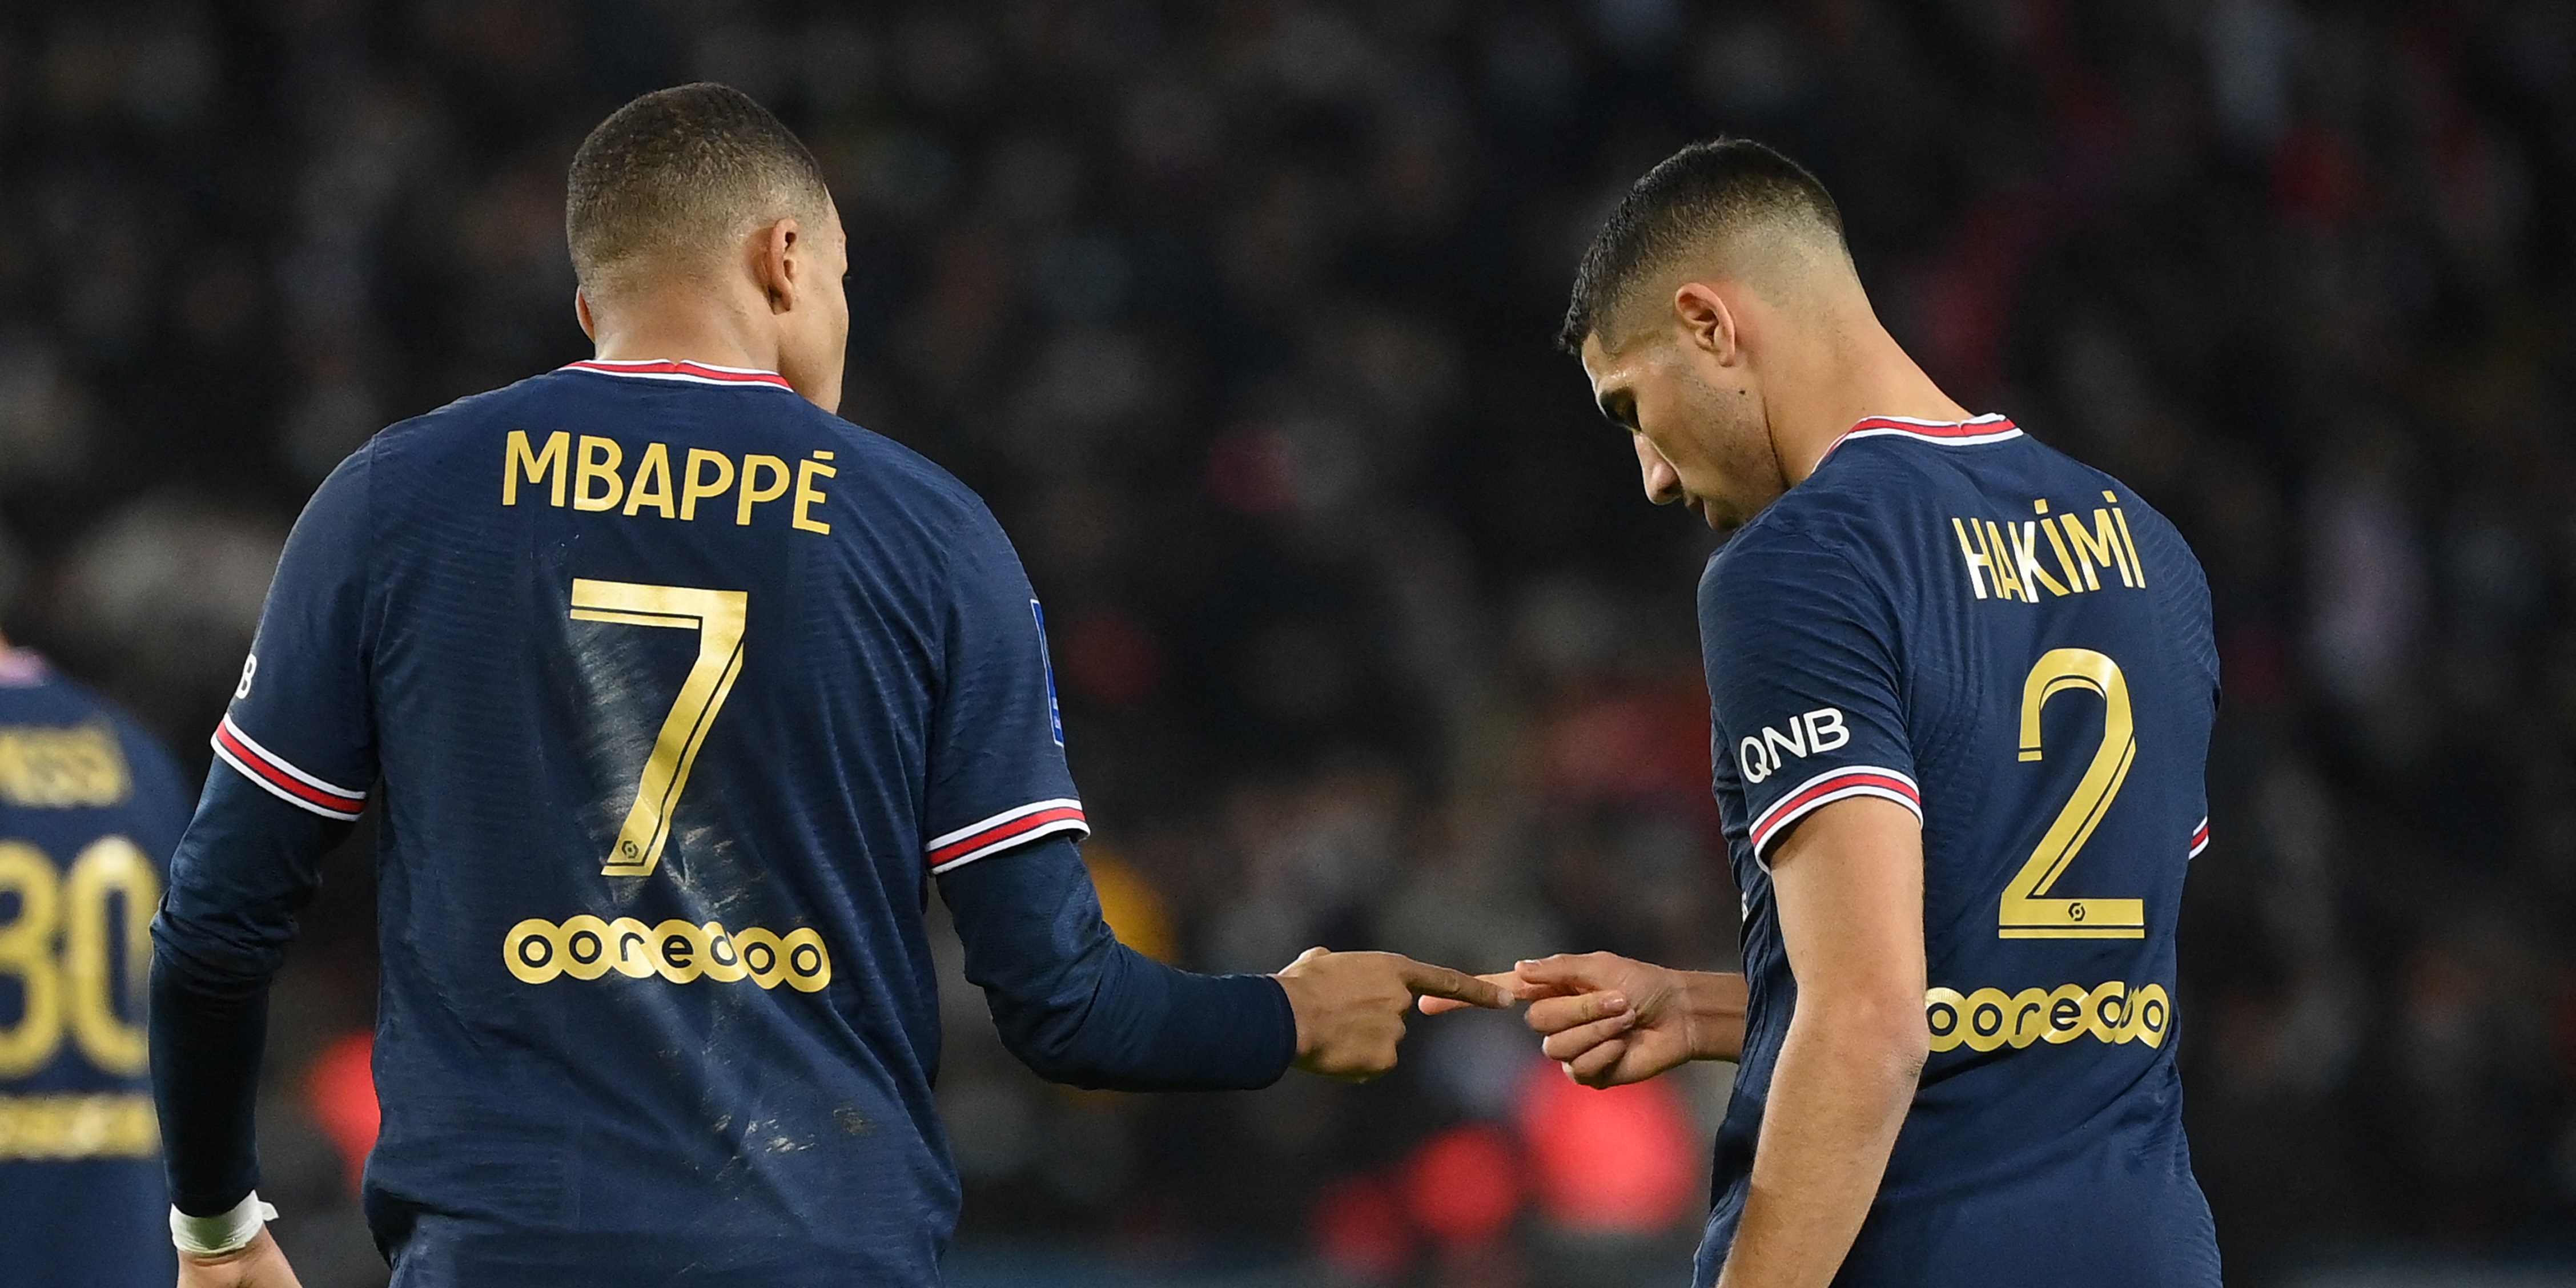 Mbappe’s latest tweet will leave Liverpool fans in fits of laughter